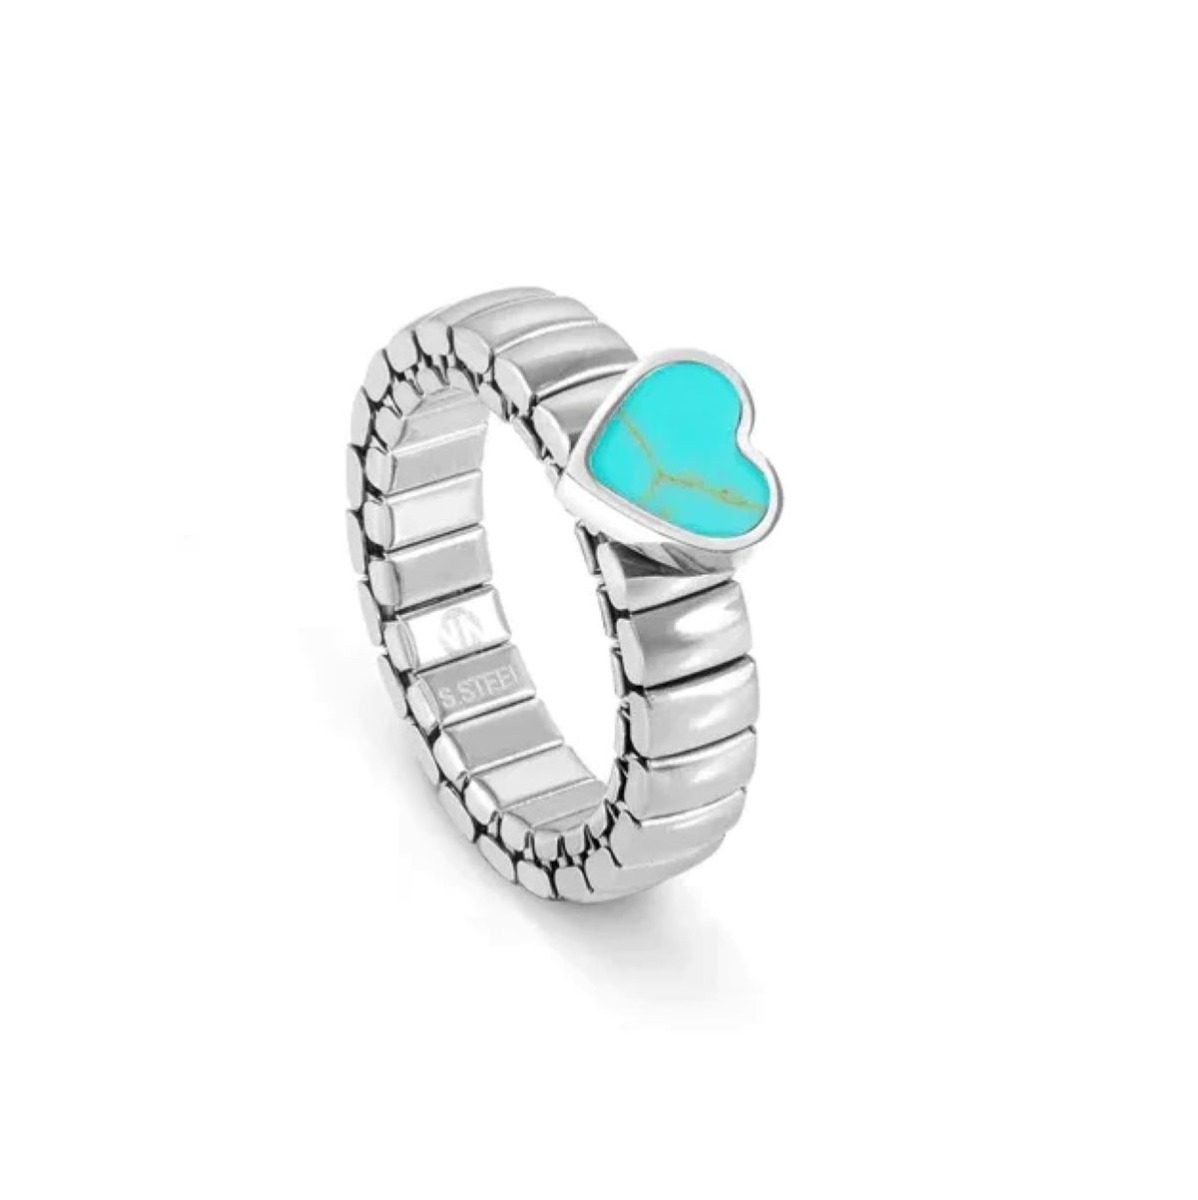 Nomination Extension Style Ring - Stainless Steel and Stone Turquoise Heart - 046002_102